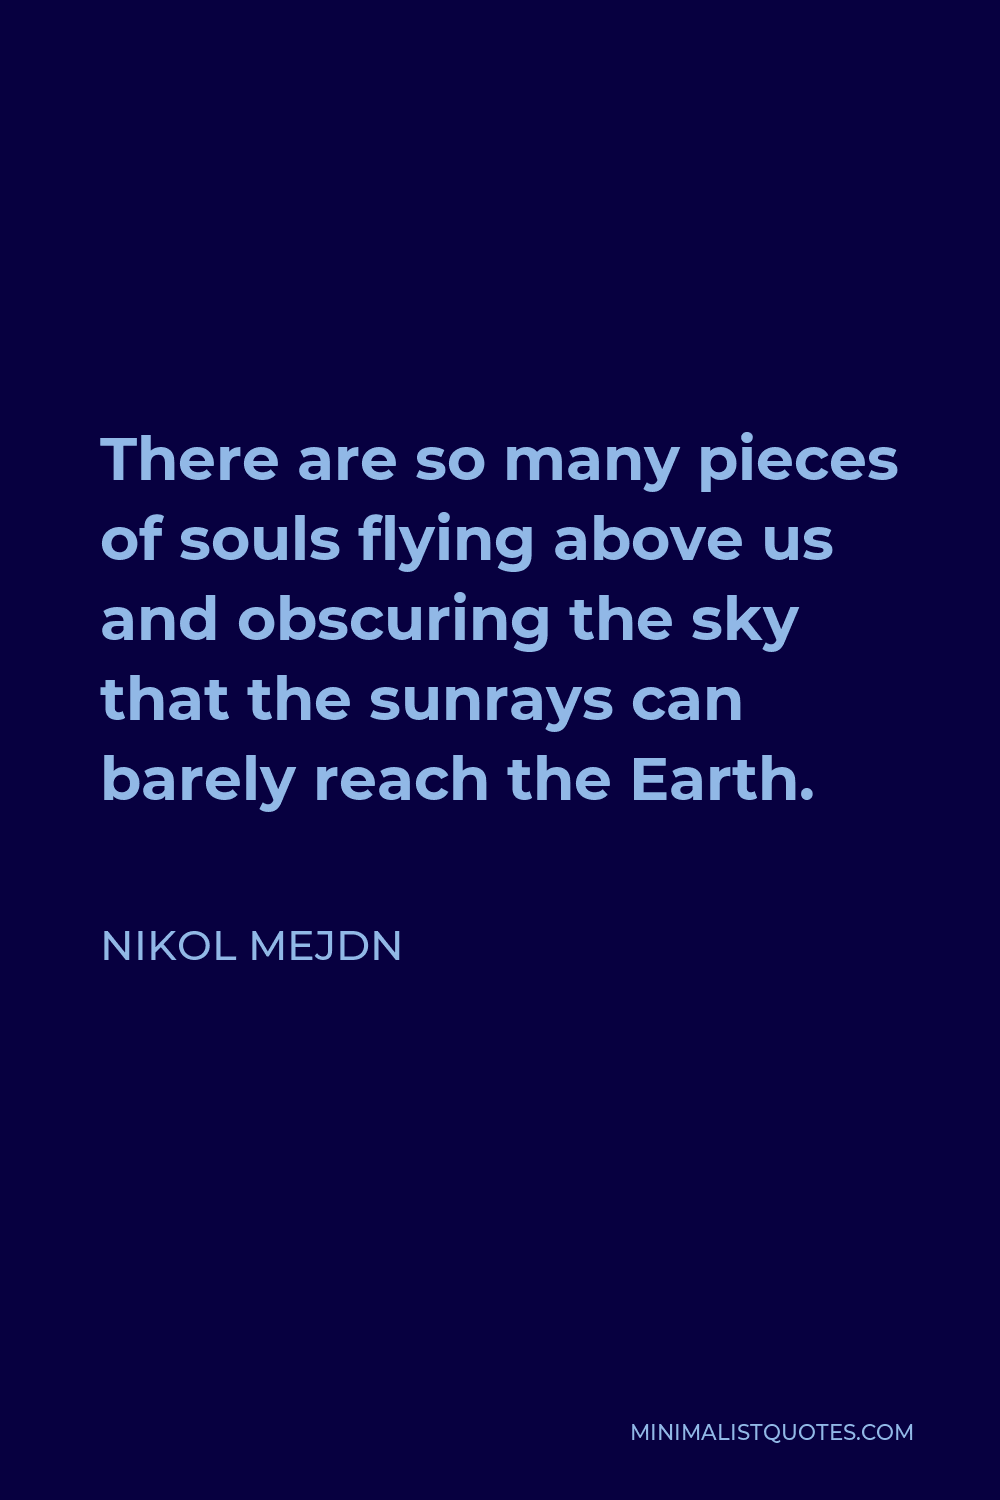 Nikol Mejdn Quote - There are so many pieces of souls flying above us and obscuring the sky that the sunrays can barely reach the Earth.